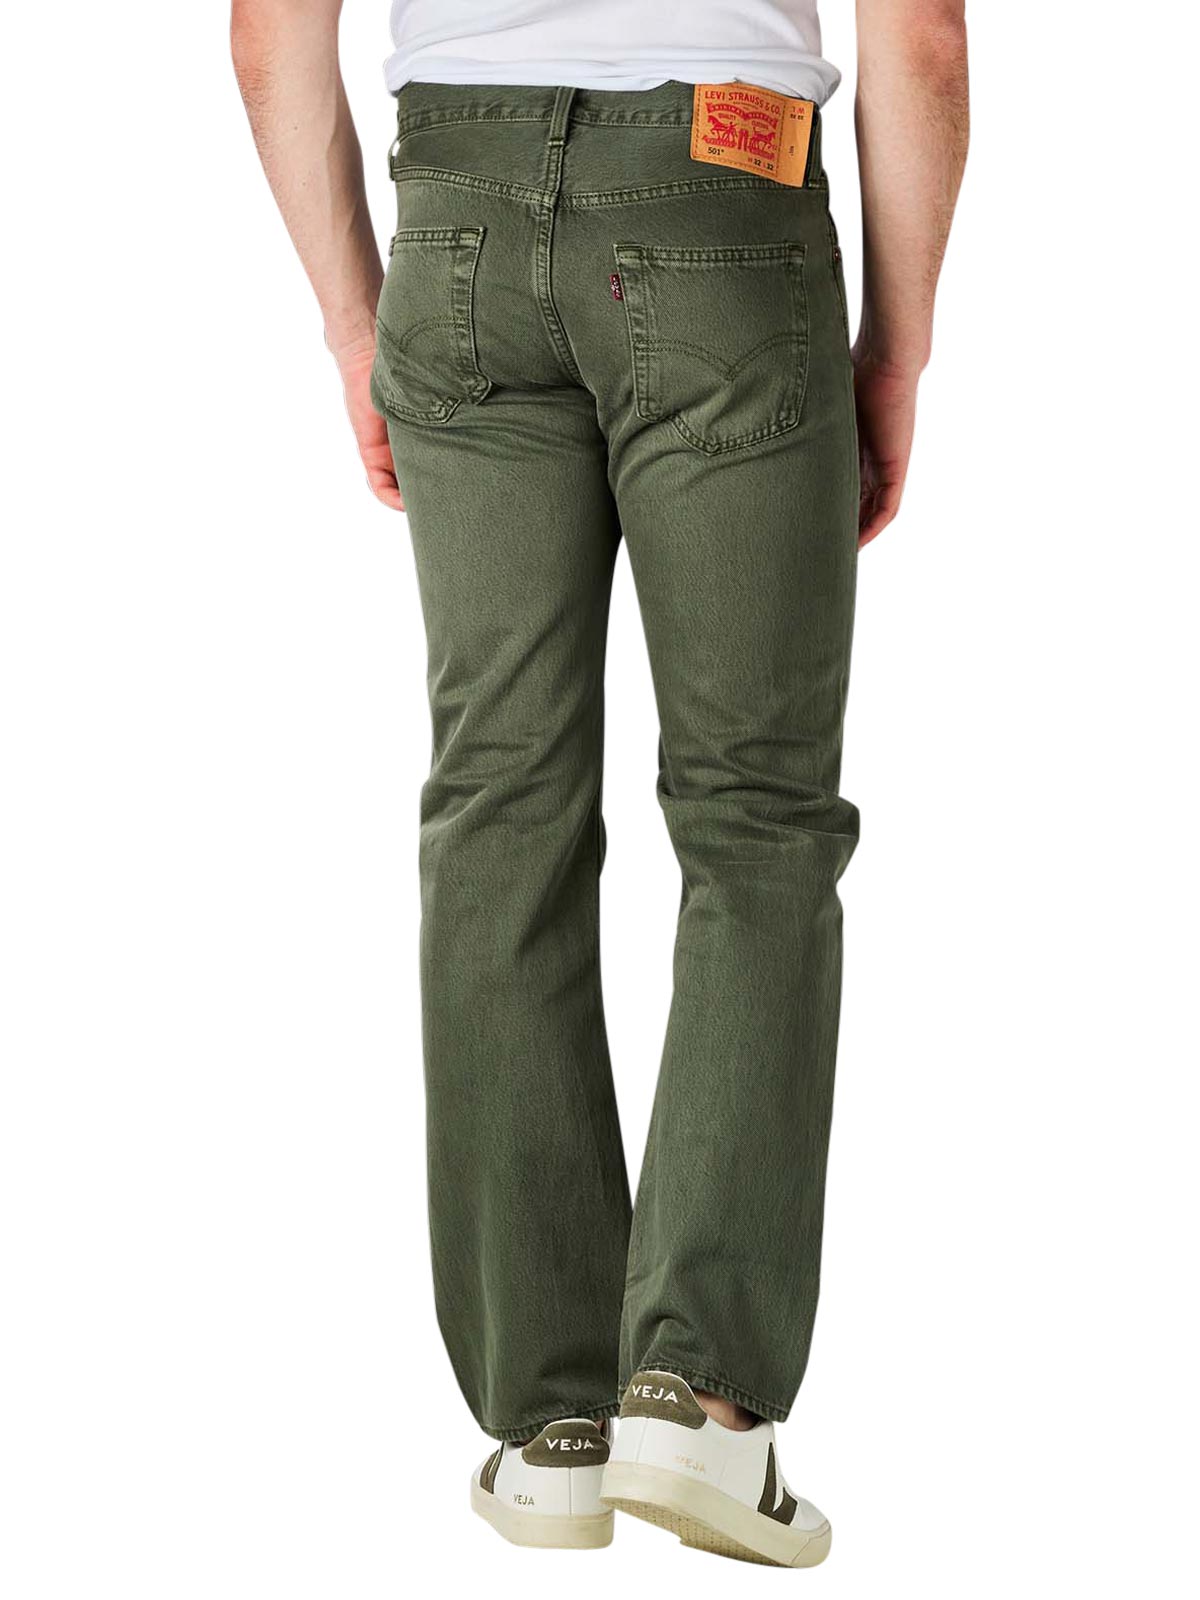 Levi's 501 Jeans Straight Fit Thyme Levi's Men's Jeans | Free Shipping on   - SIMPLY LOOK GOOD